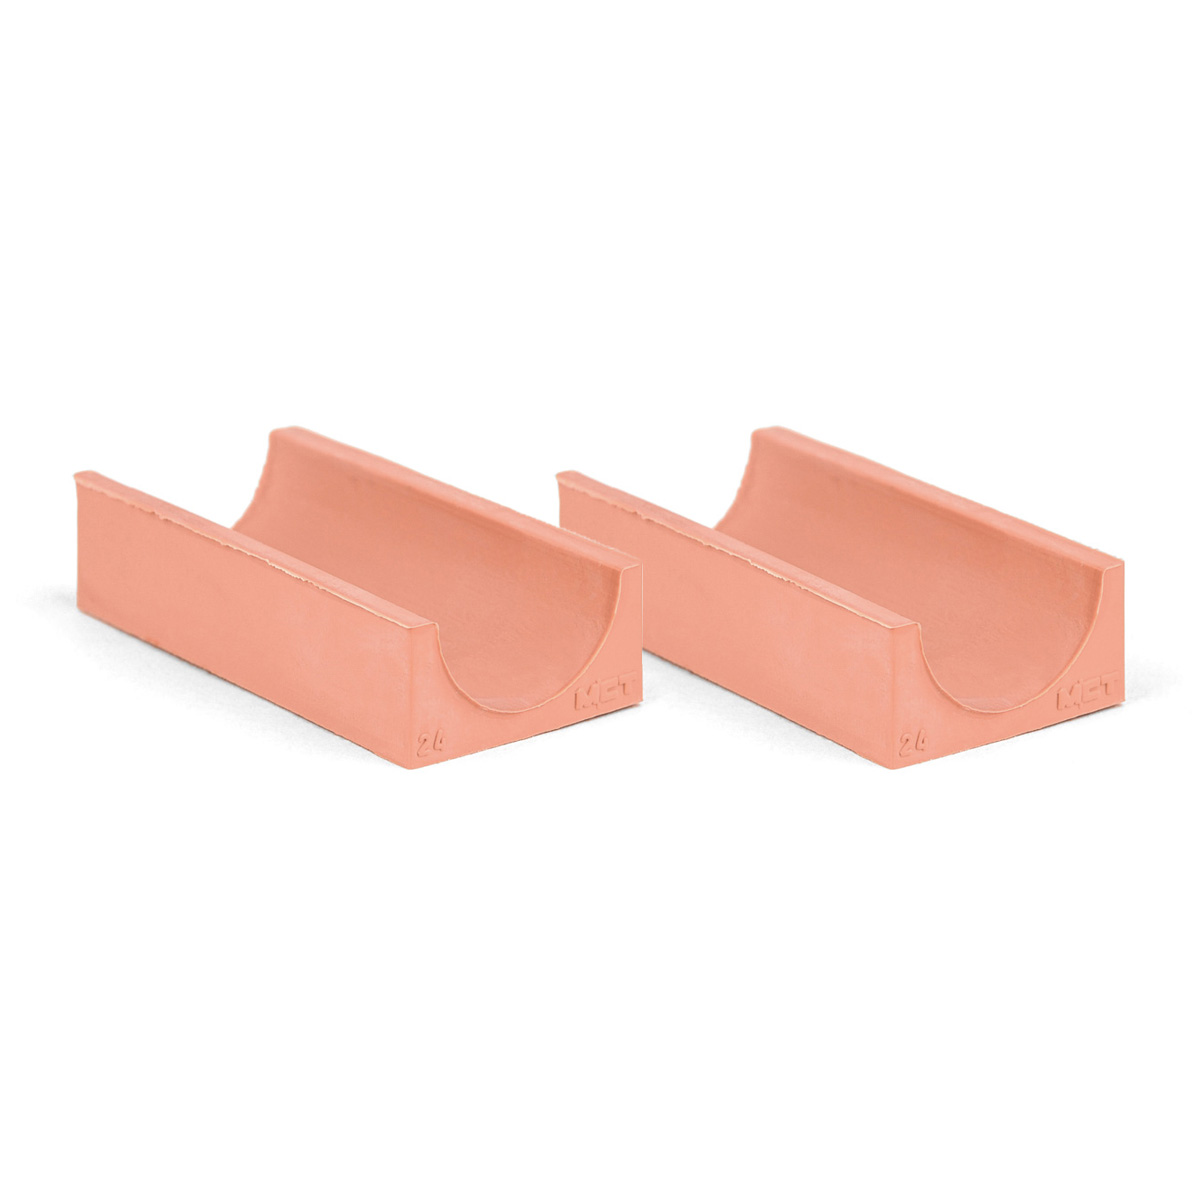 30-24*2 Set of 2 half insert block lycron, 30-24 for cable/pipe diam. 23.5-24.5mm